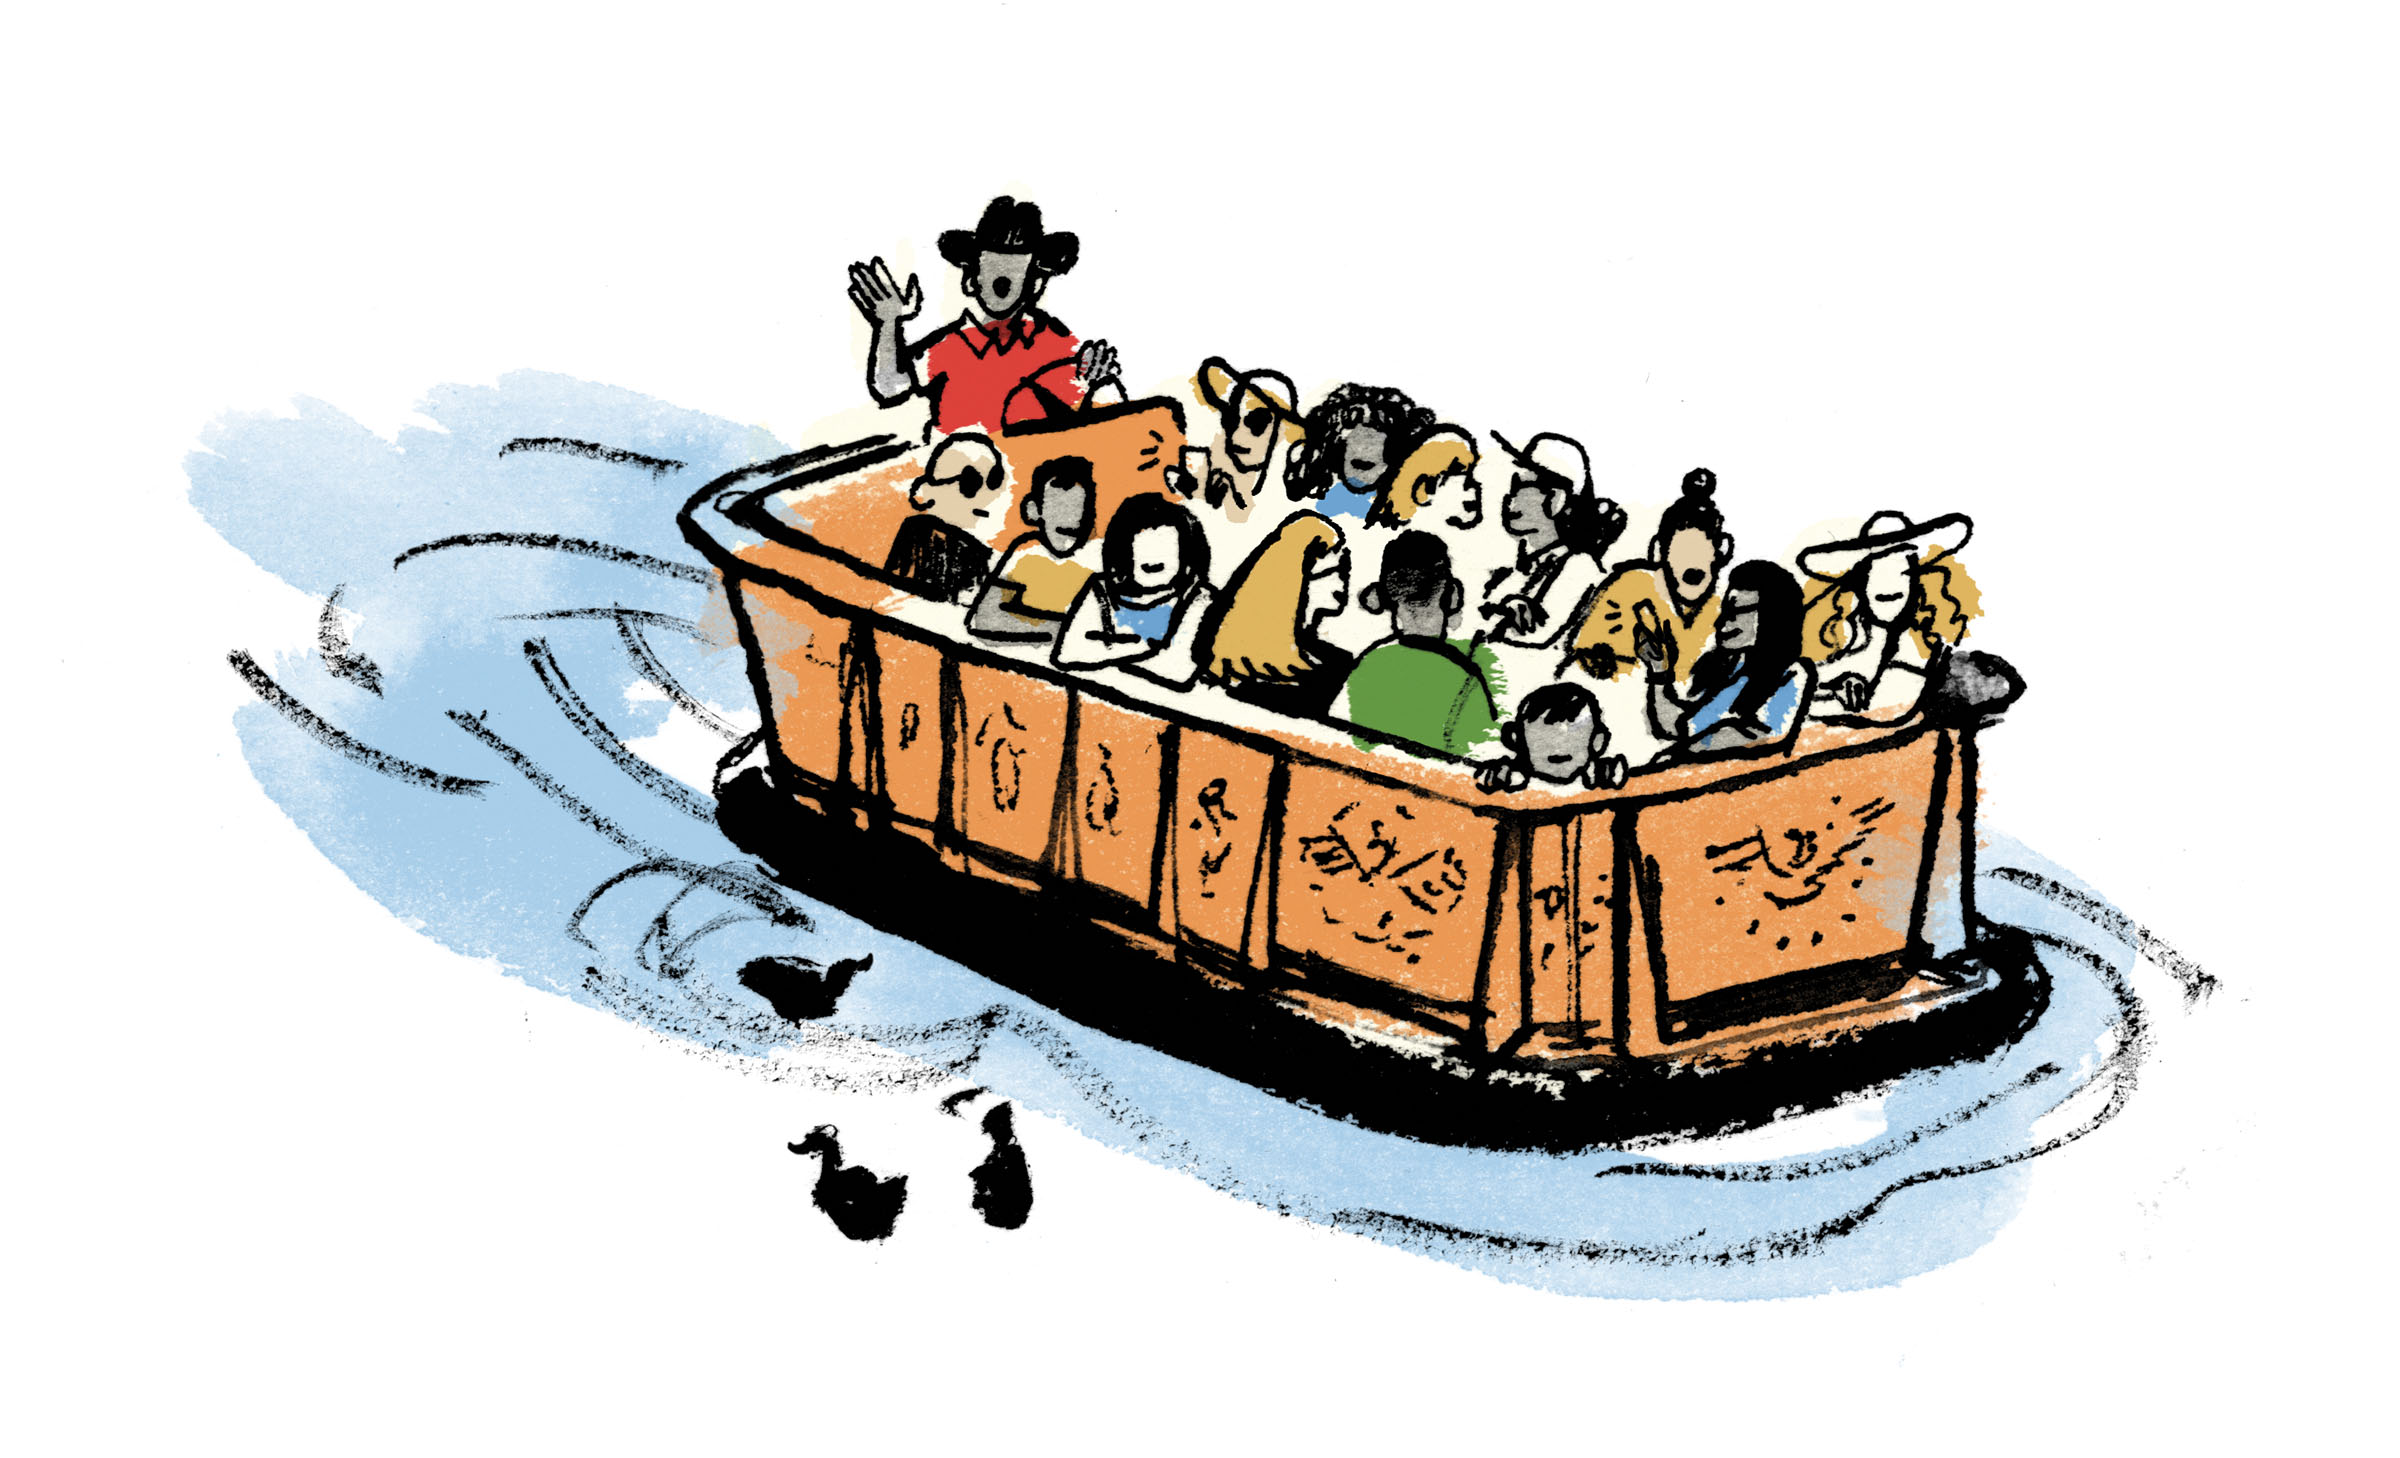 An illustration of a group of people on a riverboat tour